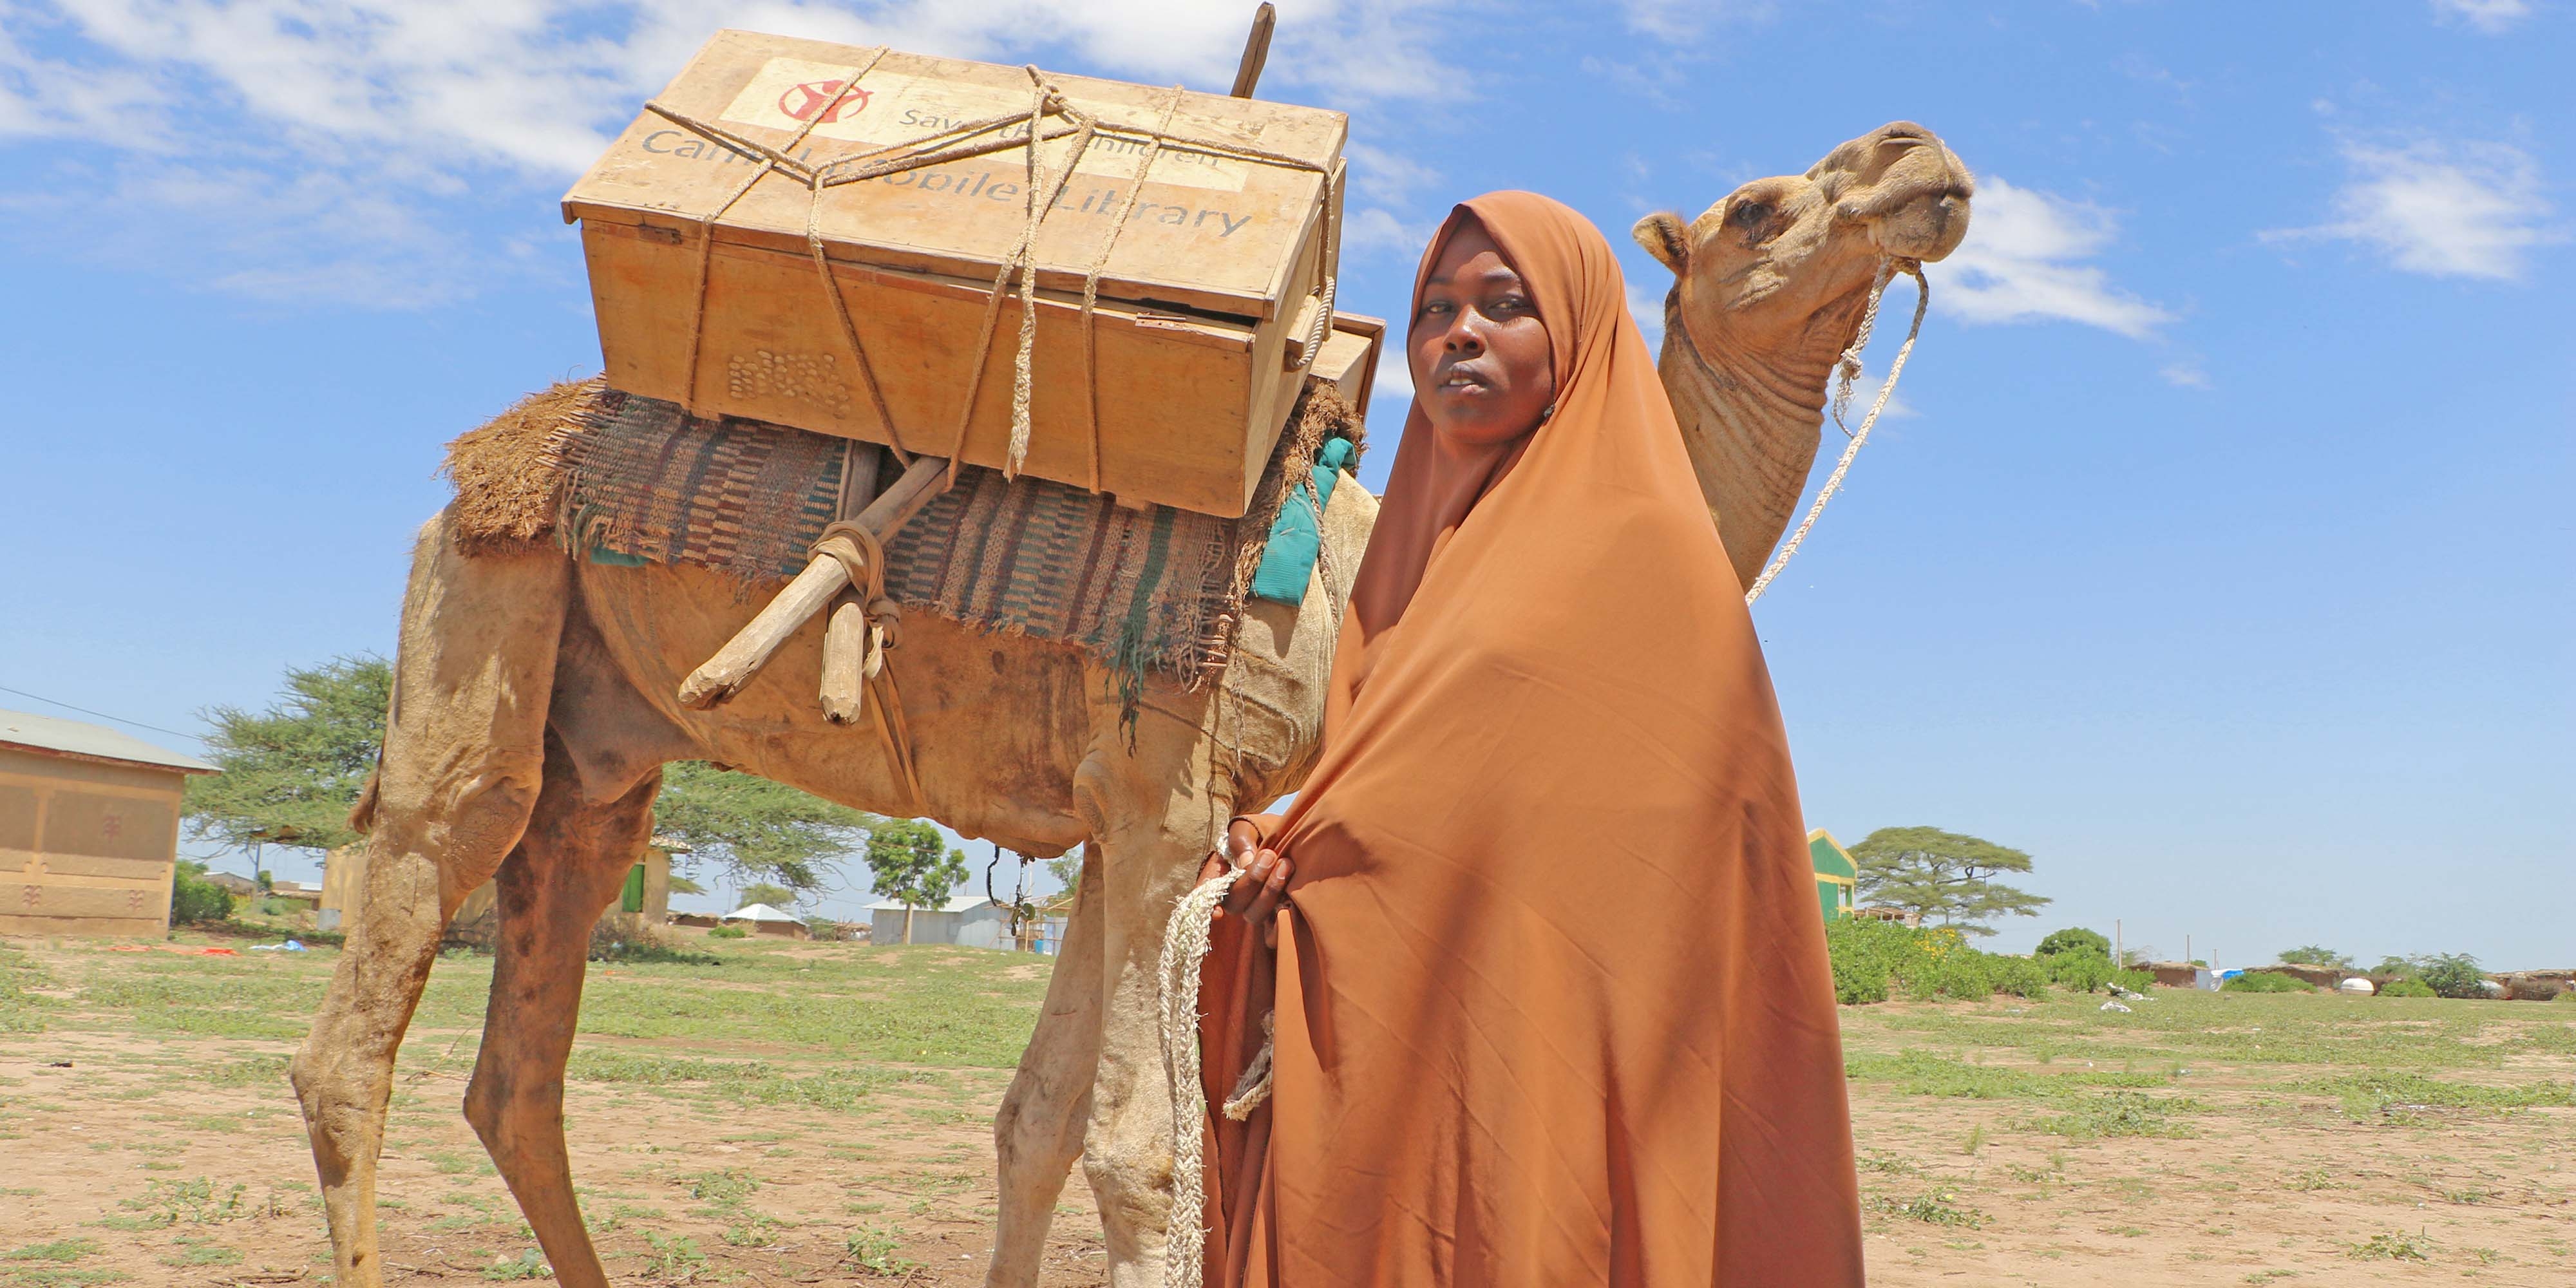 A camel carried a mobile library of books as a girl stands next to the animal in Ethiopia.